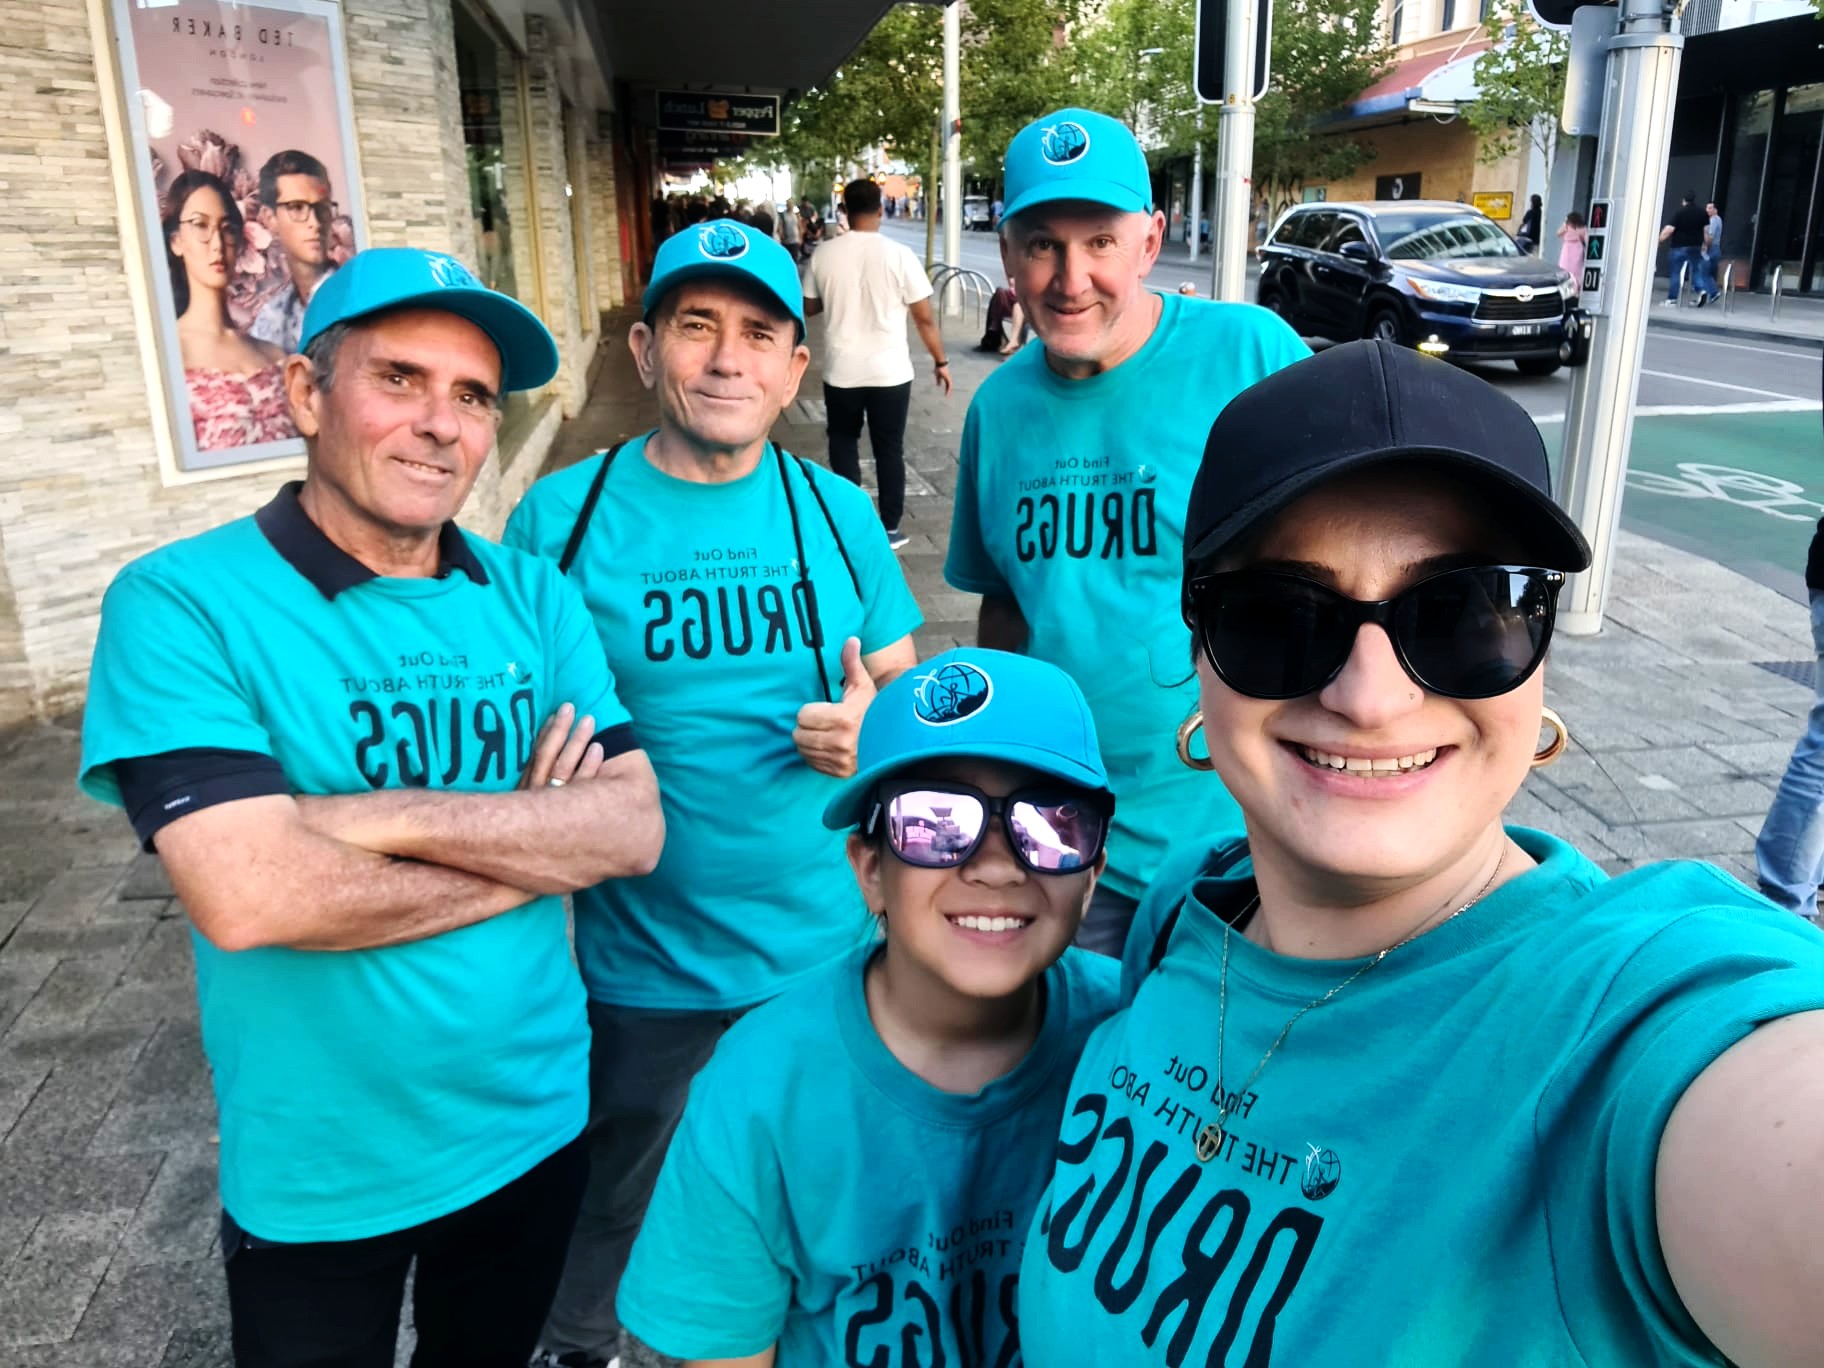 On Australia Day, Perth Scientologists Shared the Truth About Drugs